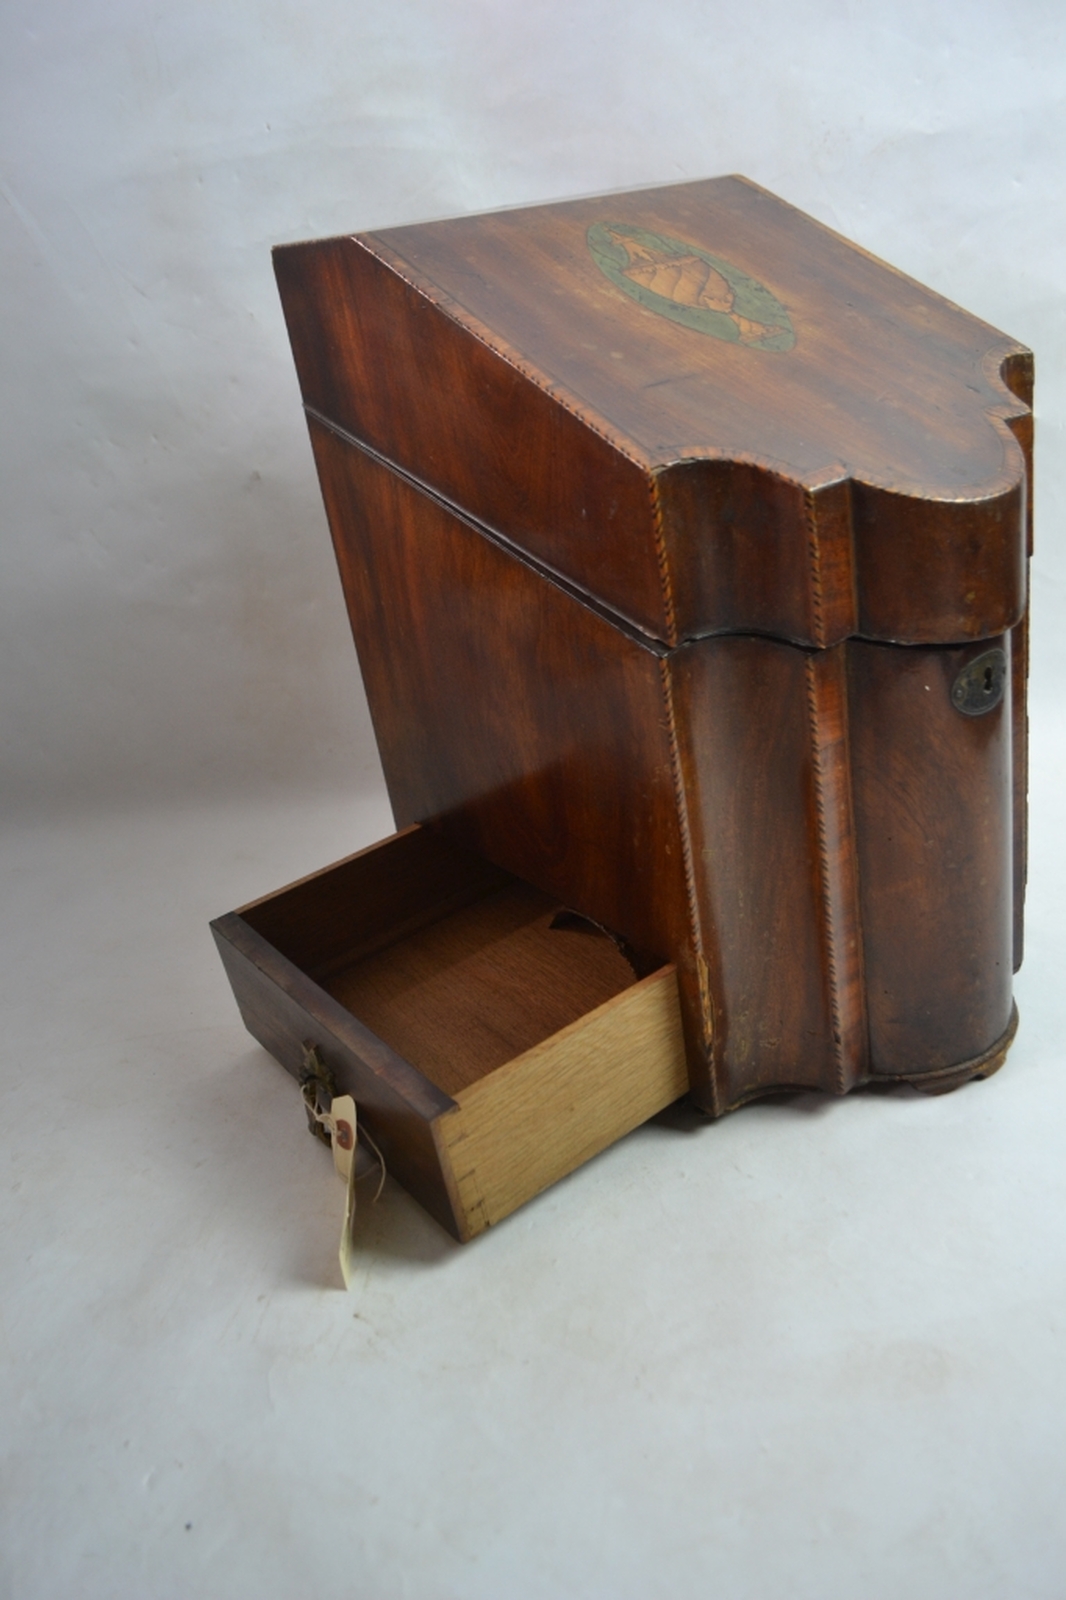 Early 19th Century Knife Box with Interior Removed.